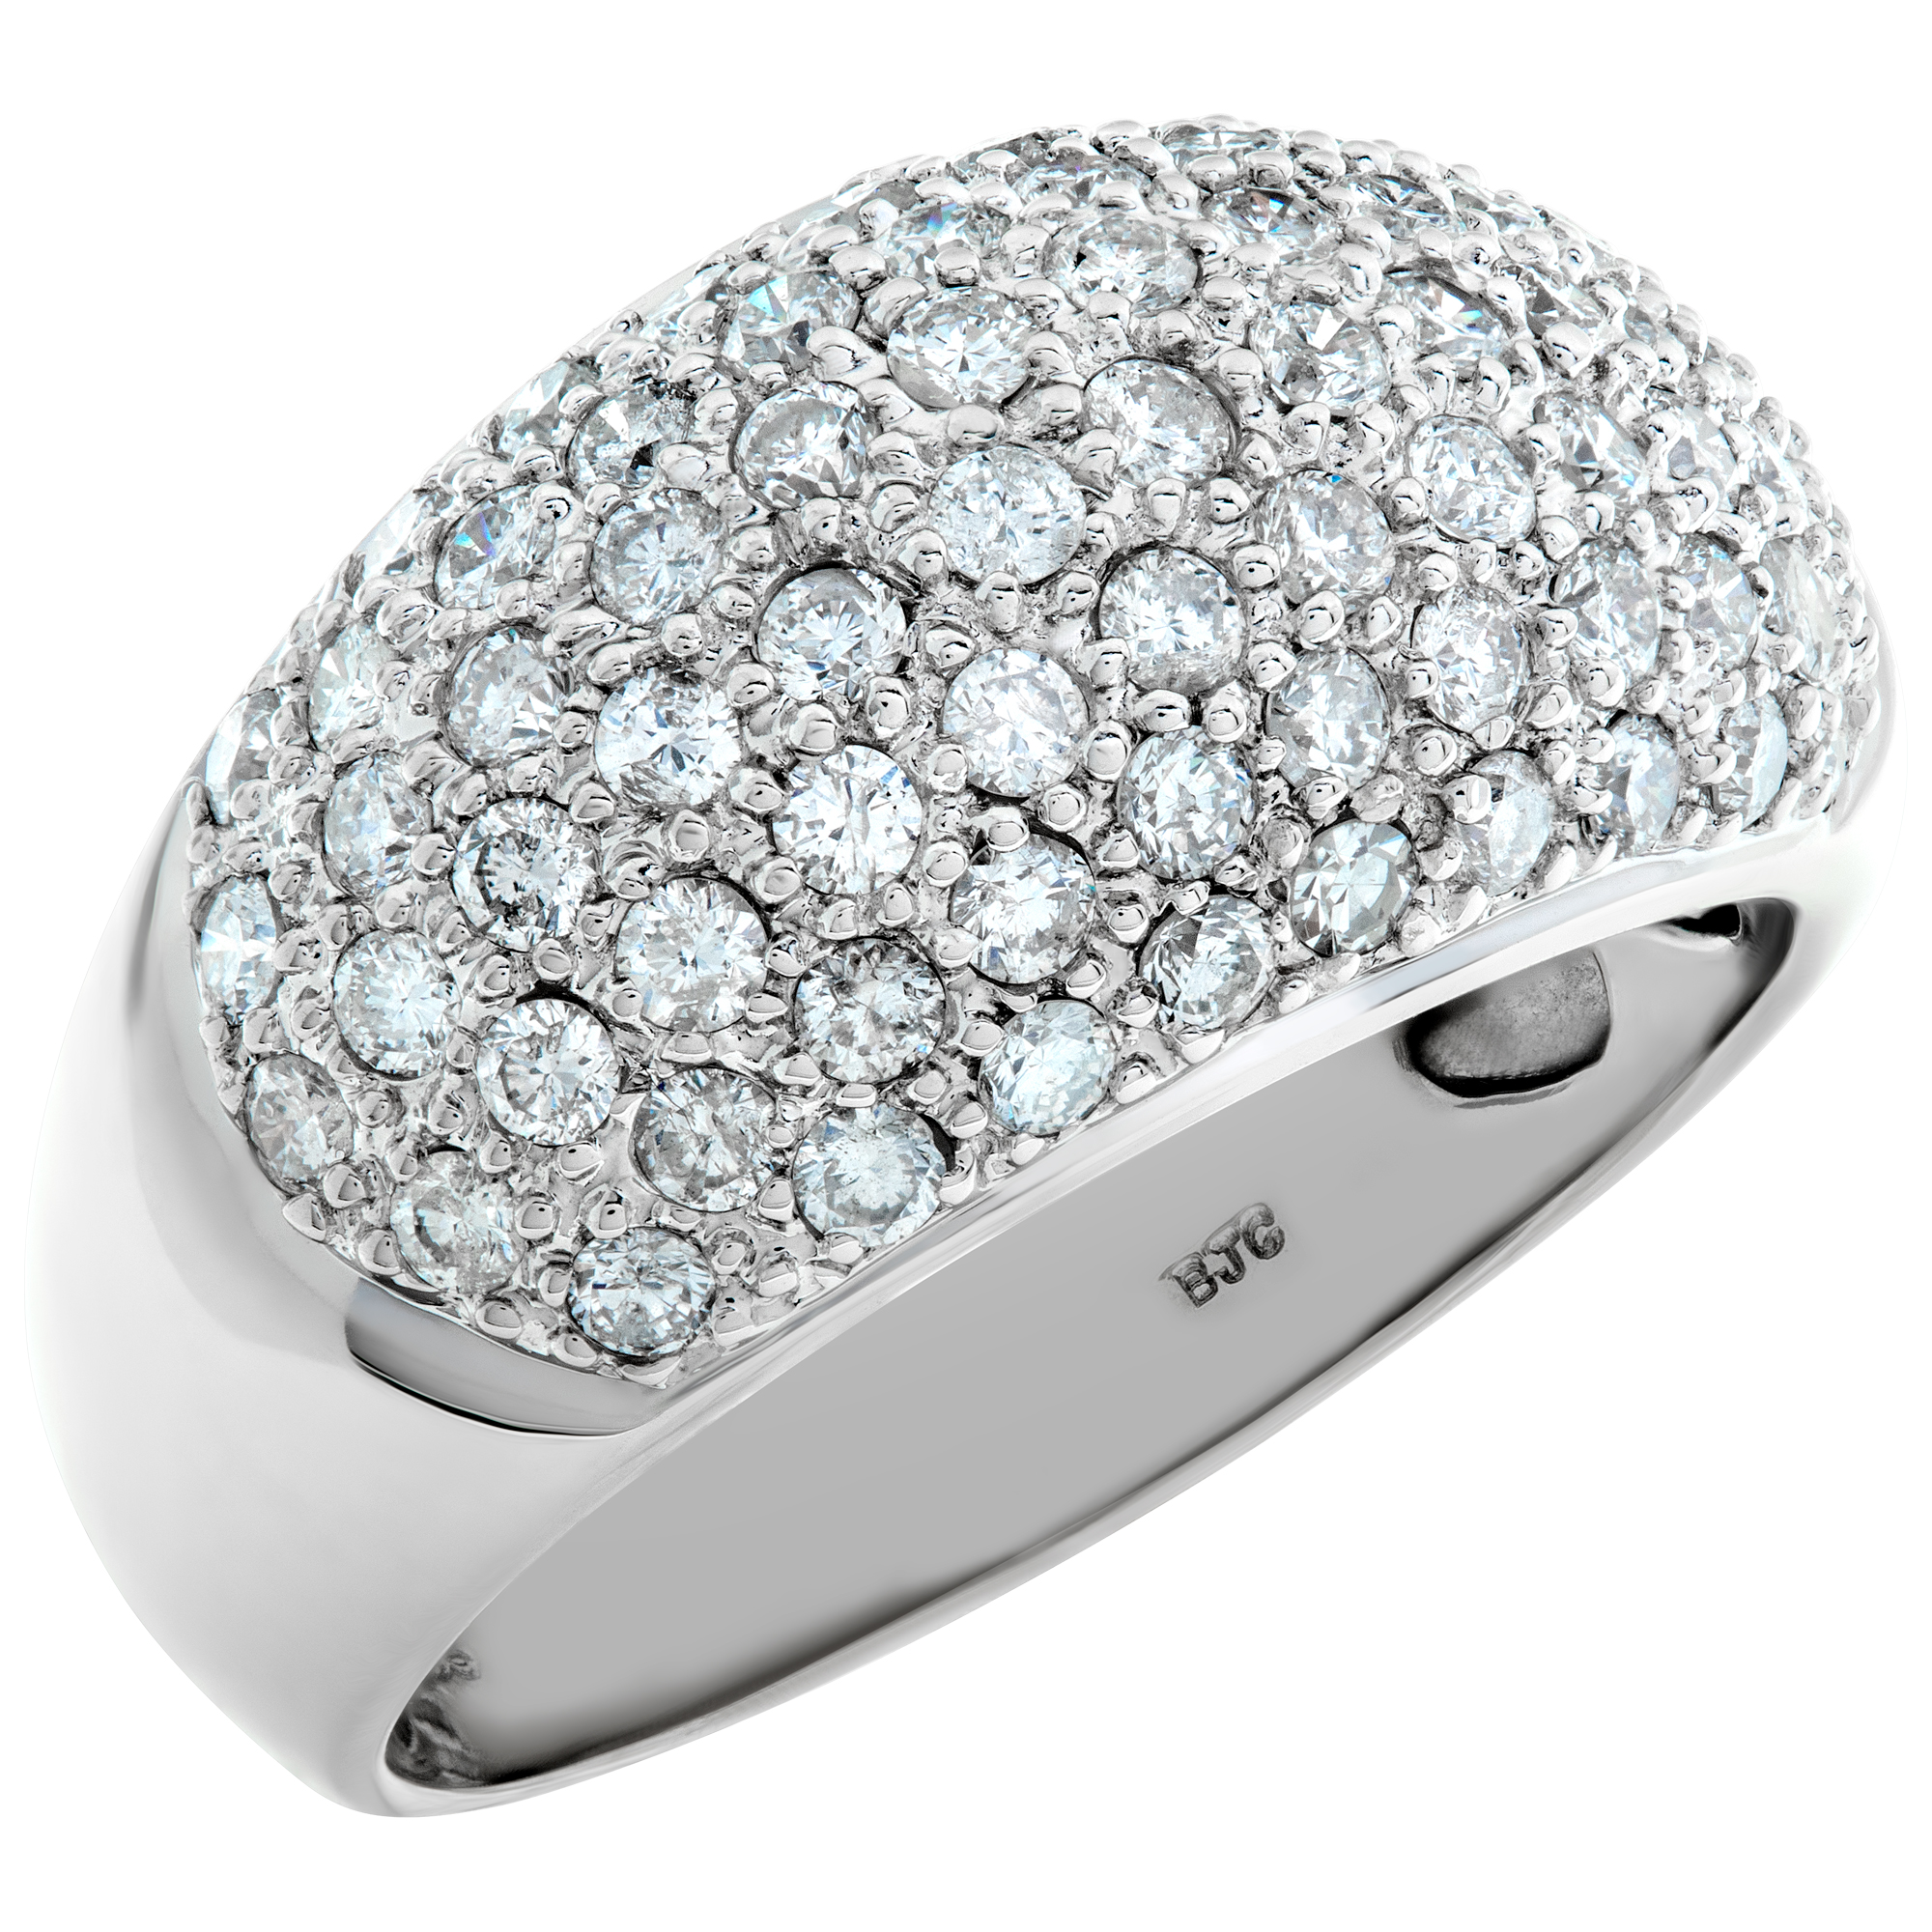 Domed Pave diamond ring in 14k white gold. 3.0 cts in pave diamonds.(G-H, SI2) image 3